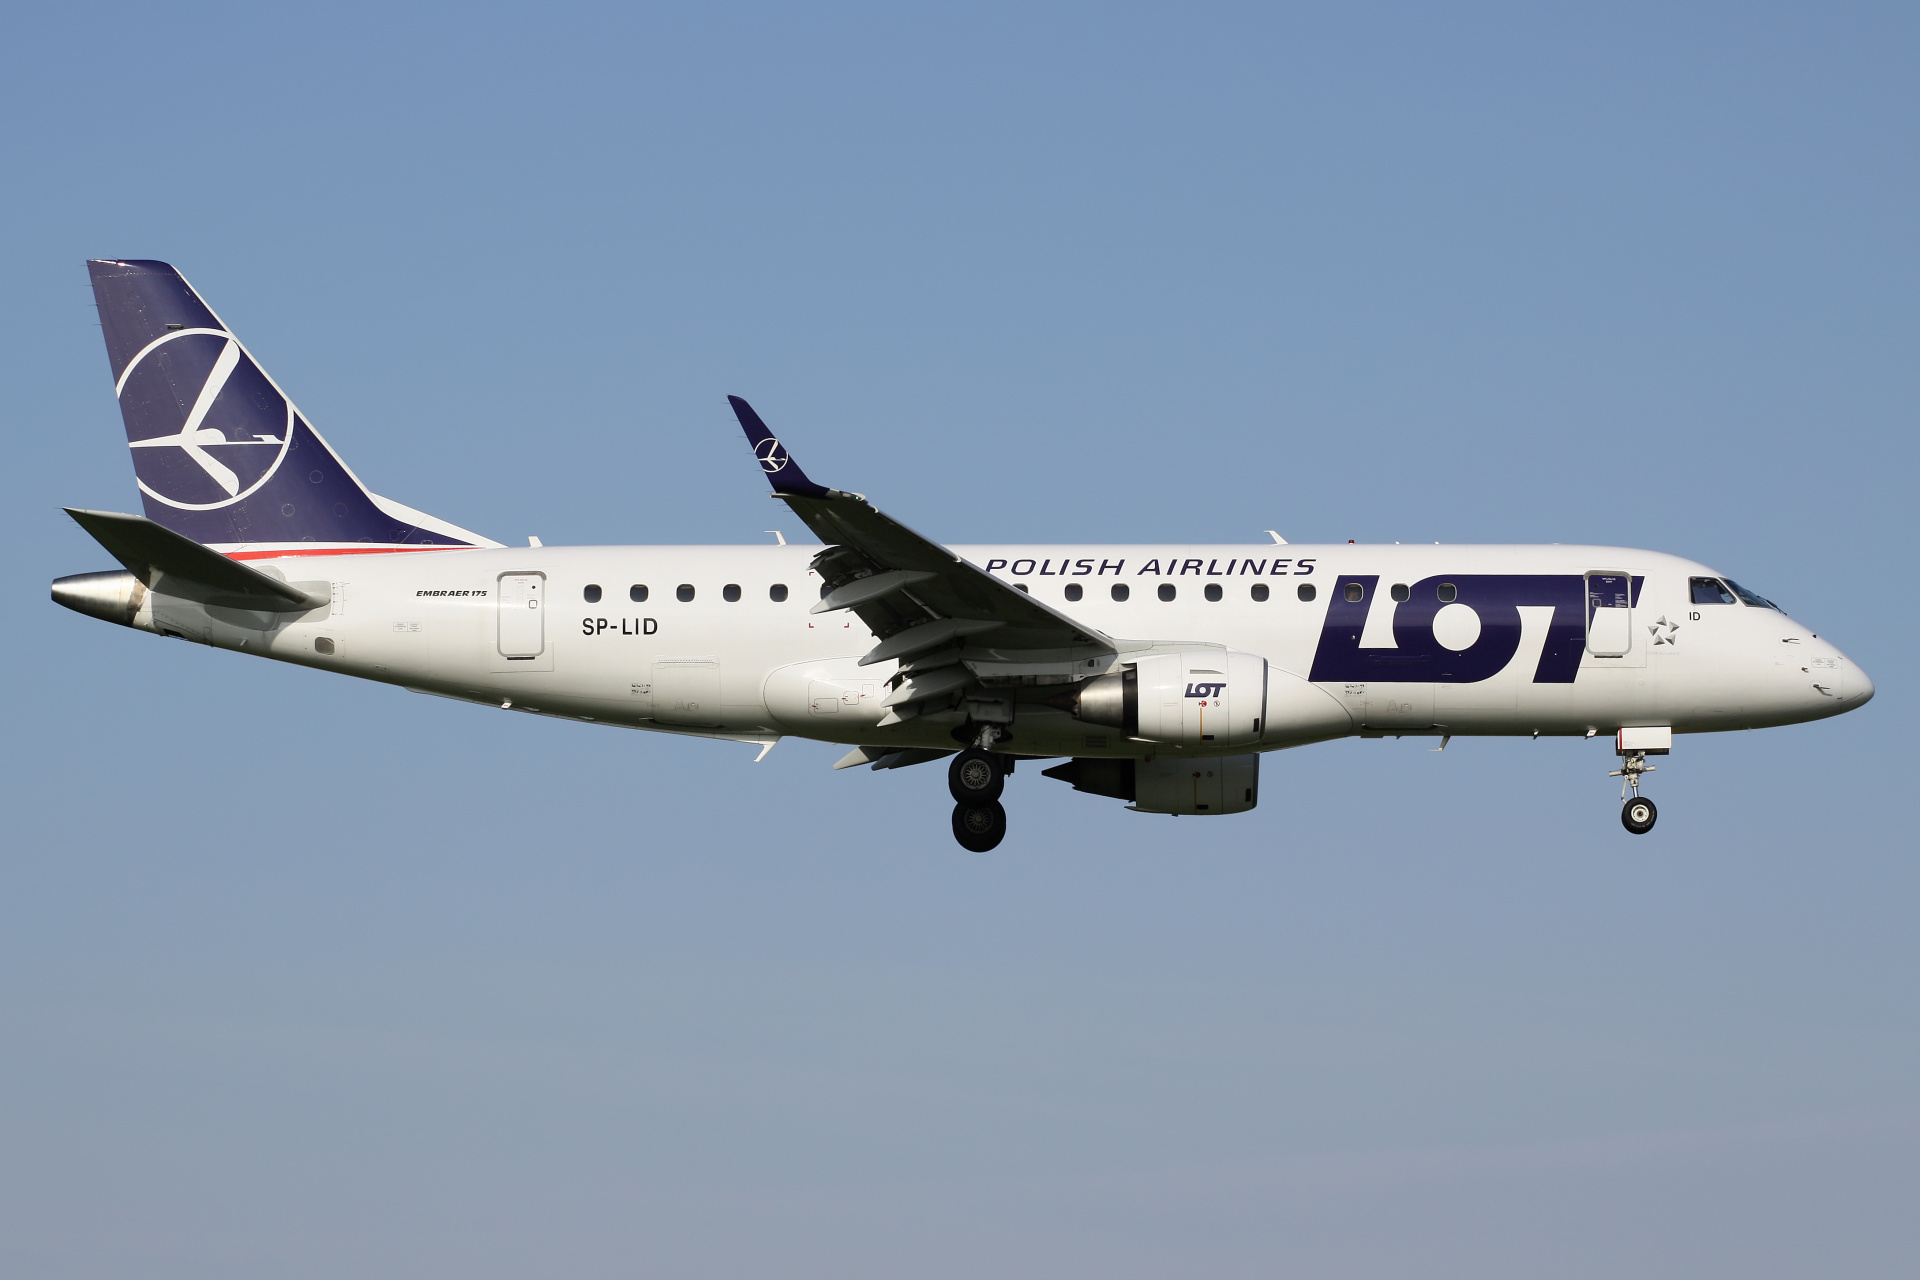 SP-LID (new livery) (Aircraft » EPWA Spotting » Embraer E175 » LOT Polish Airlines)